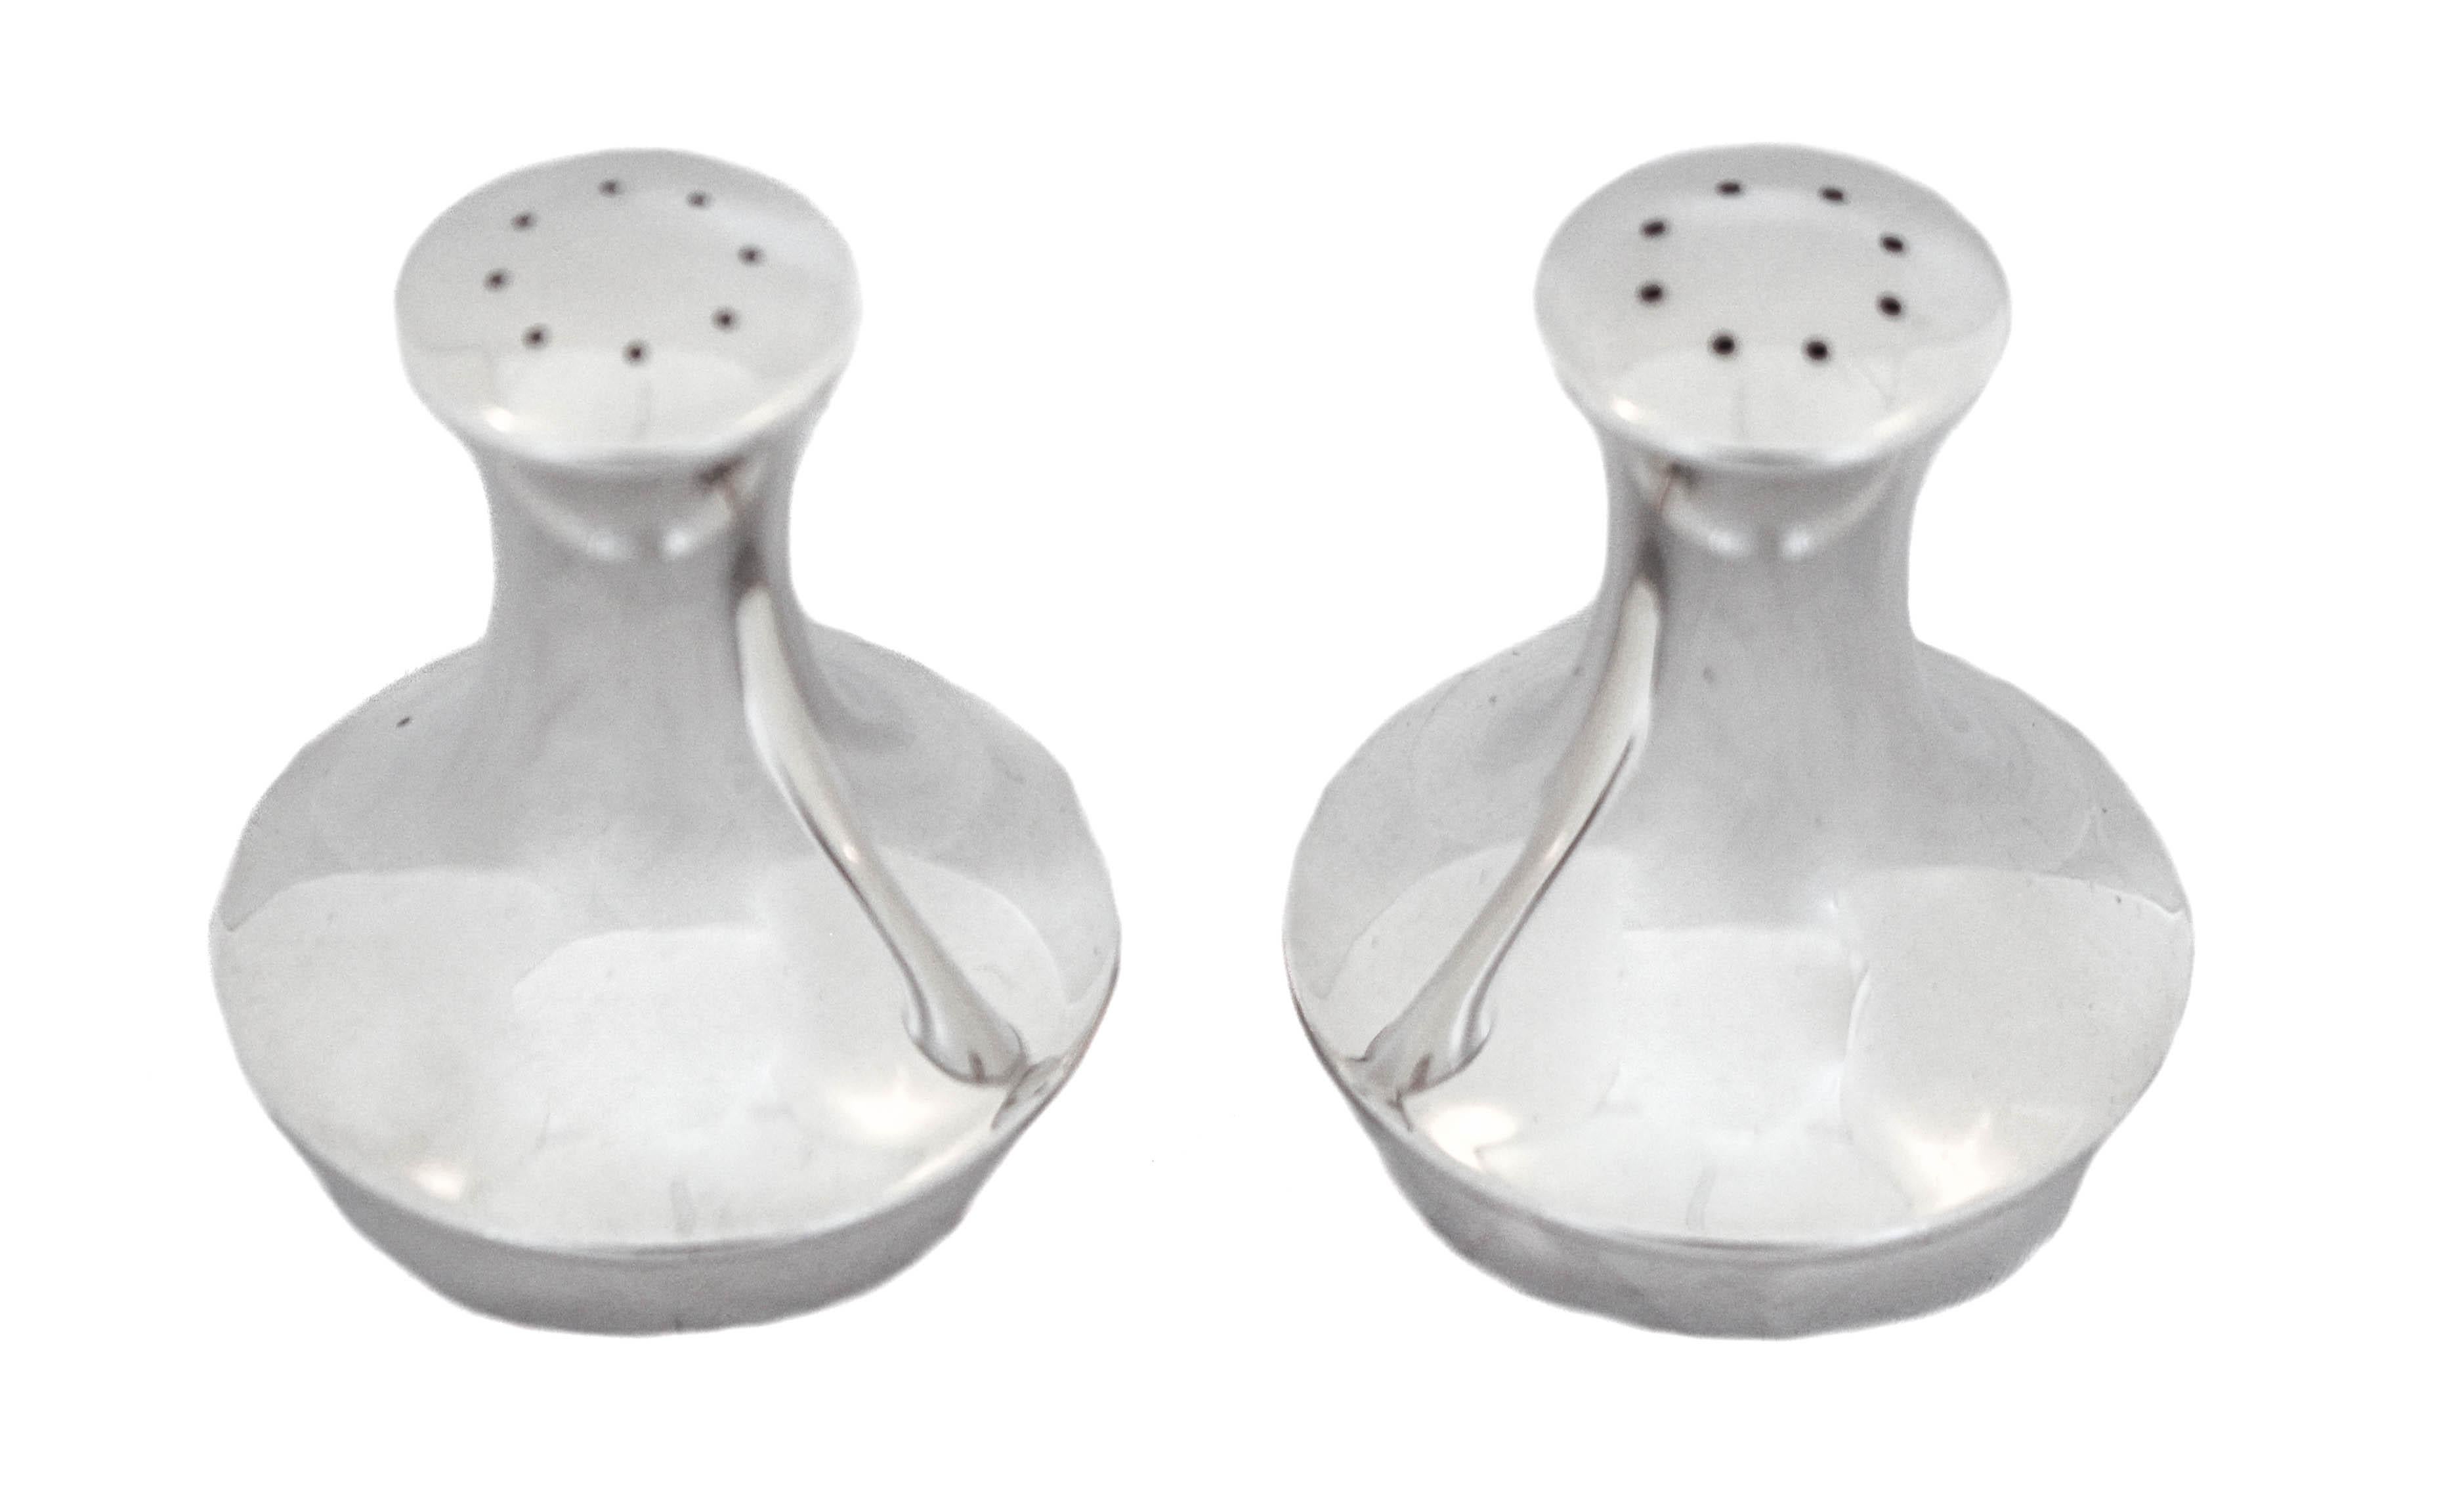 We love the sleek modernism look of these sterling silver salt shakers. Manufactured by Reed and Barton in the late 1950’s - early 1960’s, they have that quintessential Mid-Century modernism look and shape. Narrow on top with a wider base, they are